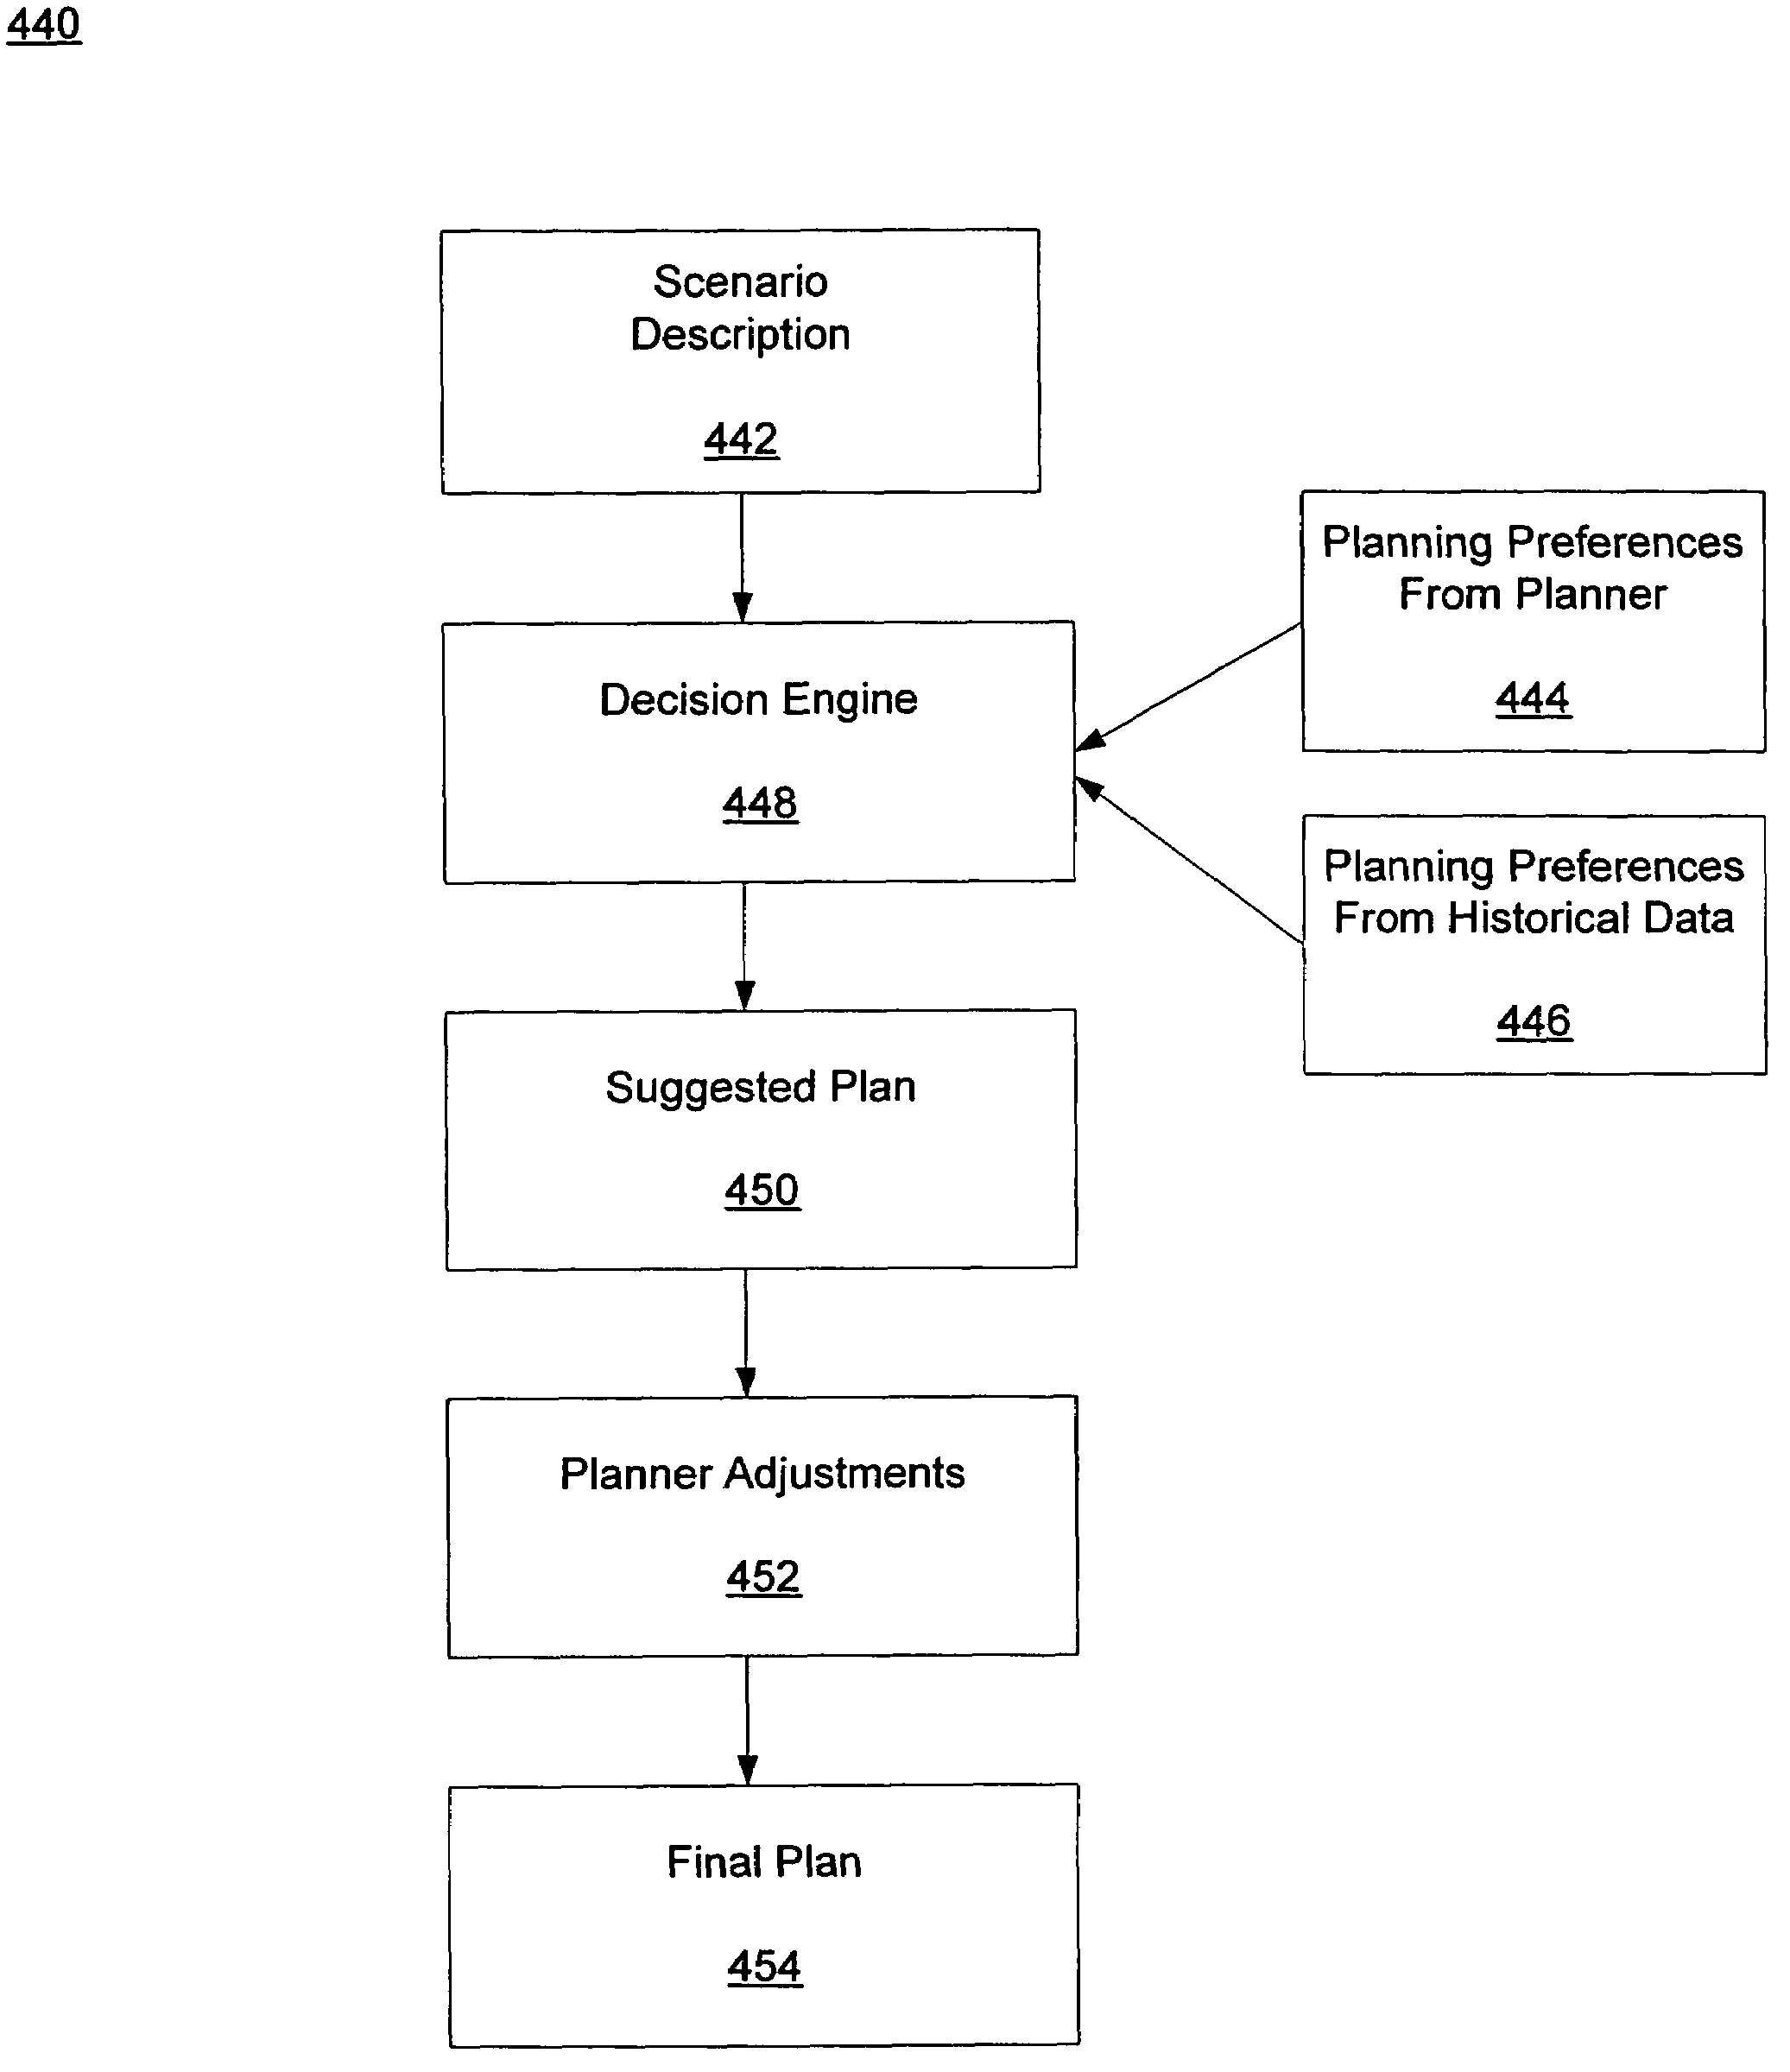 Method and apparatus for planning a manufacturing schedule using an adaptive learning process